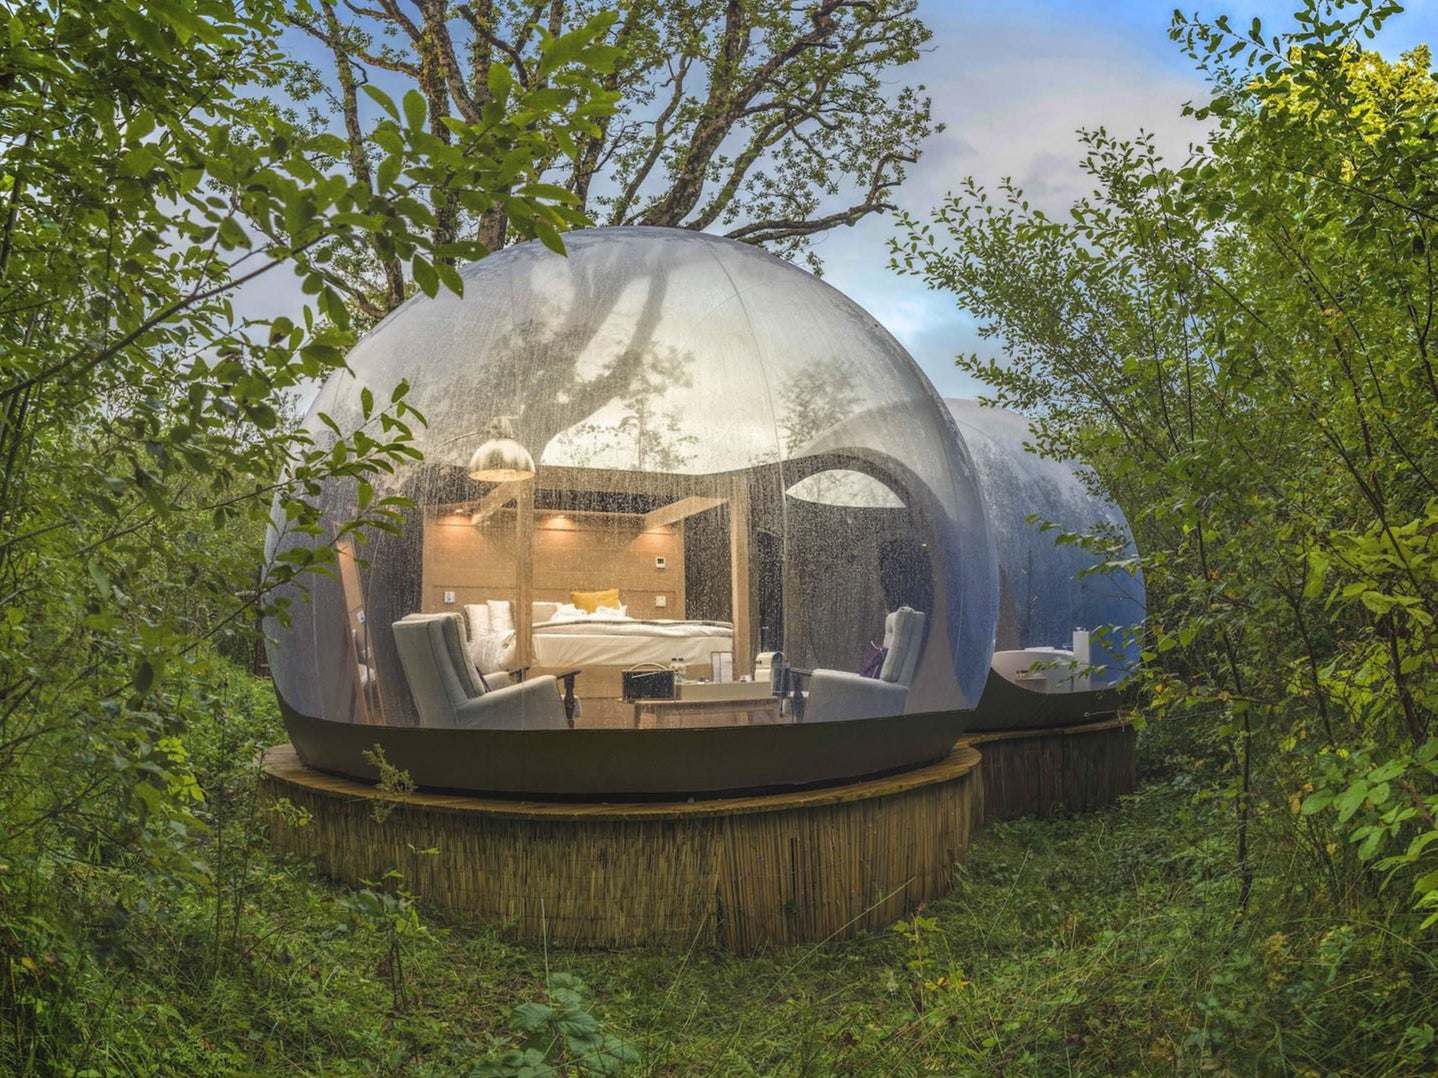 The unique domes are set in a private forest